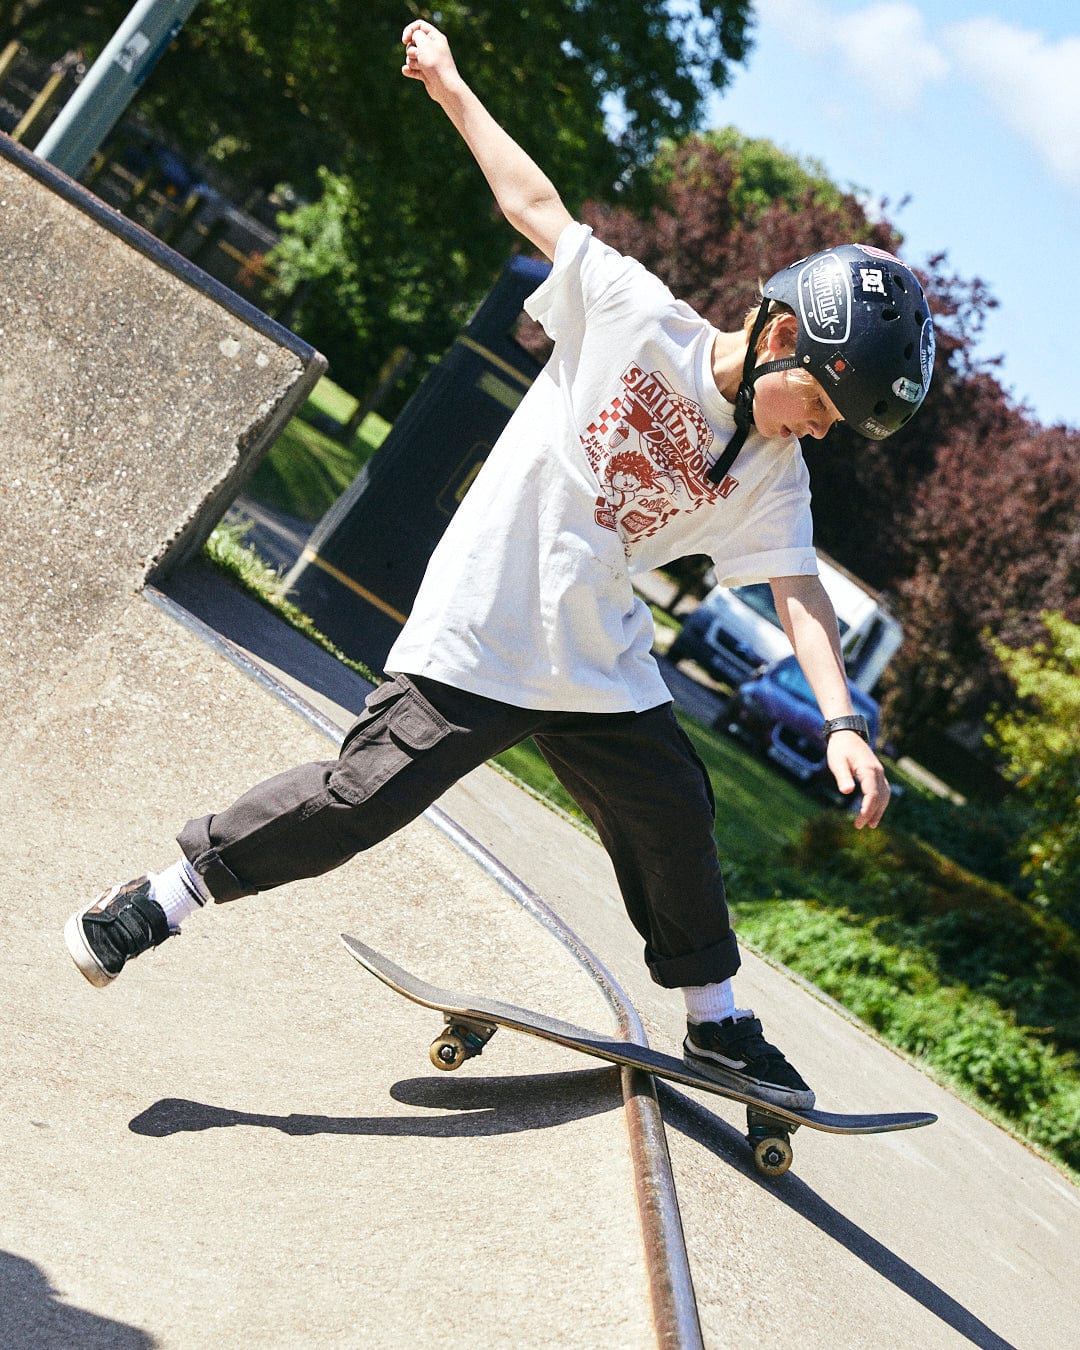 A child wearing a helmet and protective gear skateboards on a rail at a skate park, showcasing their Saltrock Taco Tok - Kids Short Sleeve T-Shirt logo, surrounded by green trees and a sunny sky.